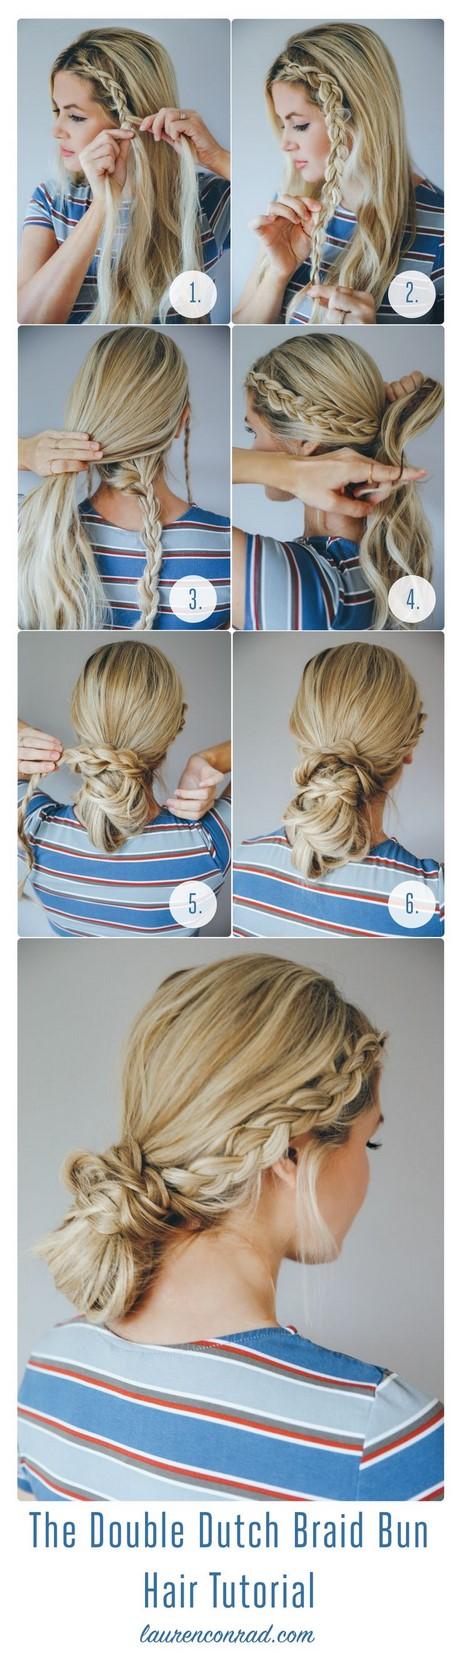 Quick easy braid hairstyles quick-easy-braid-hairstyles-78_7